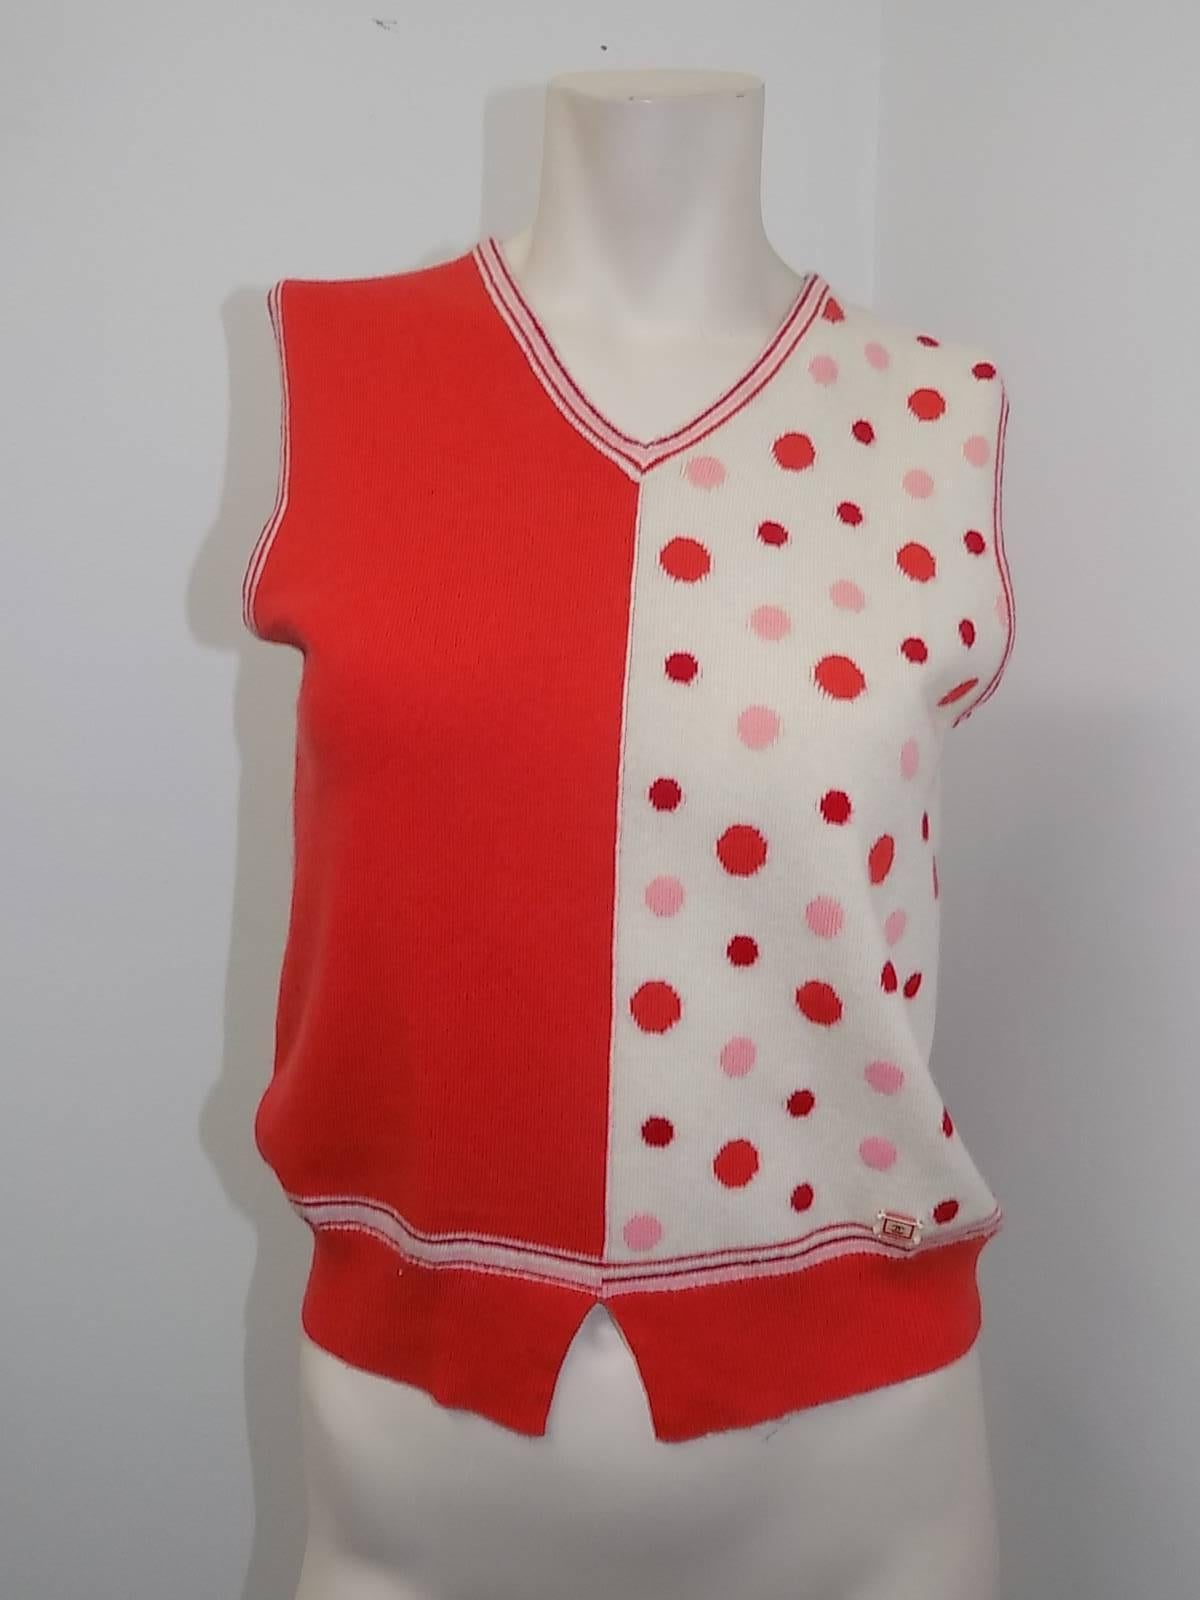  Fabulous and in pristine condition Chanel  two colors  red and orange 3 piece 100%  cashmere sweater. It has two different sleeveless tops,one with polka dots and one solid.  Set features white bread trim detail and clear cc logo buttons. French  